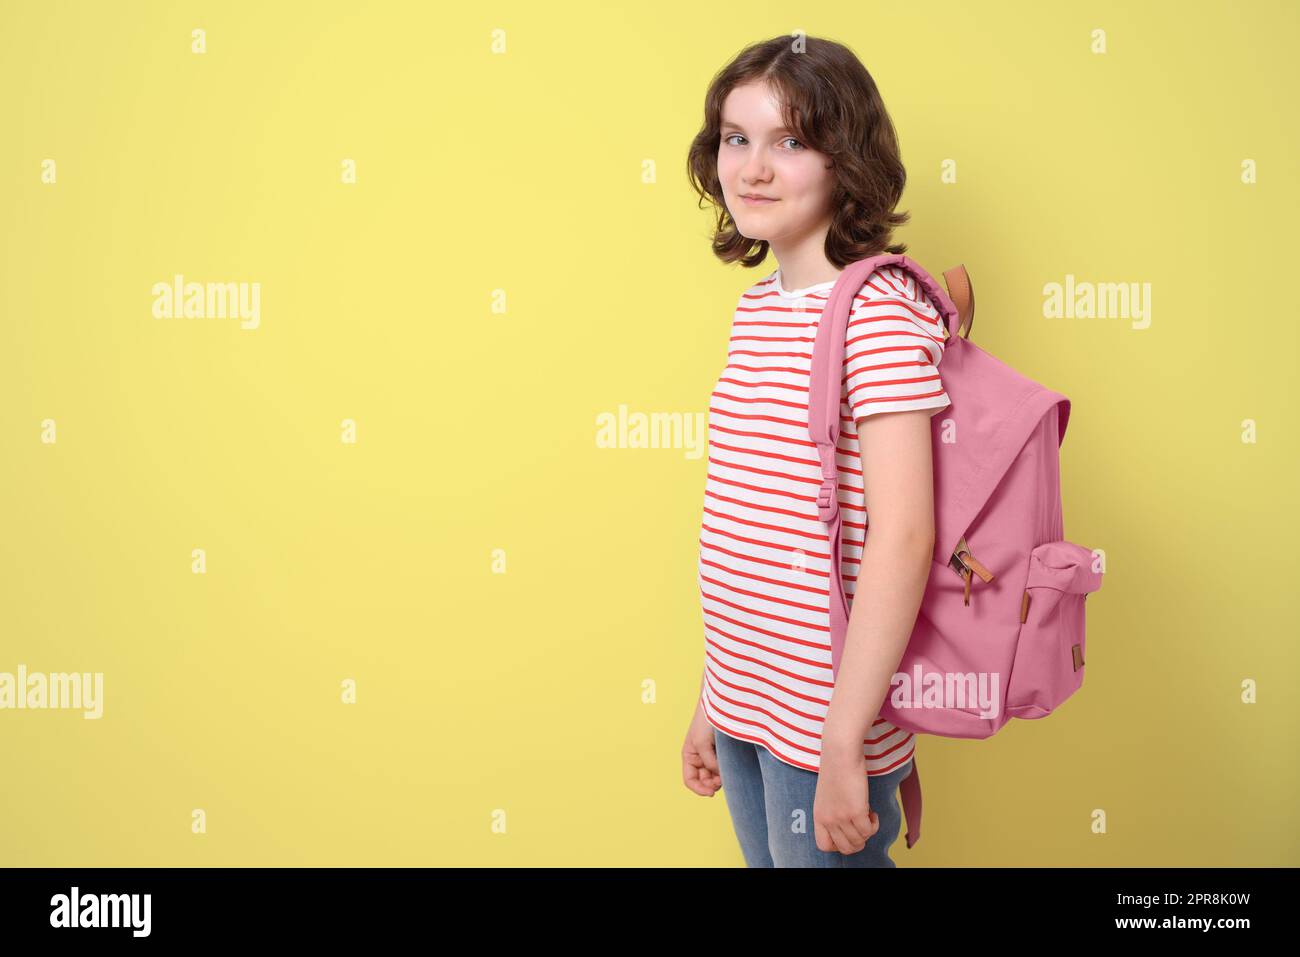 Schoolgirl standing, smiling and holding a backpack, looking at camera, on yellow background Stock Photo